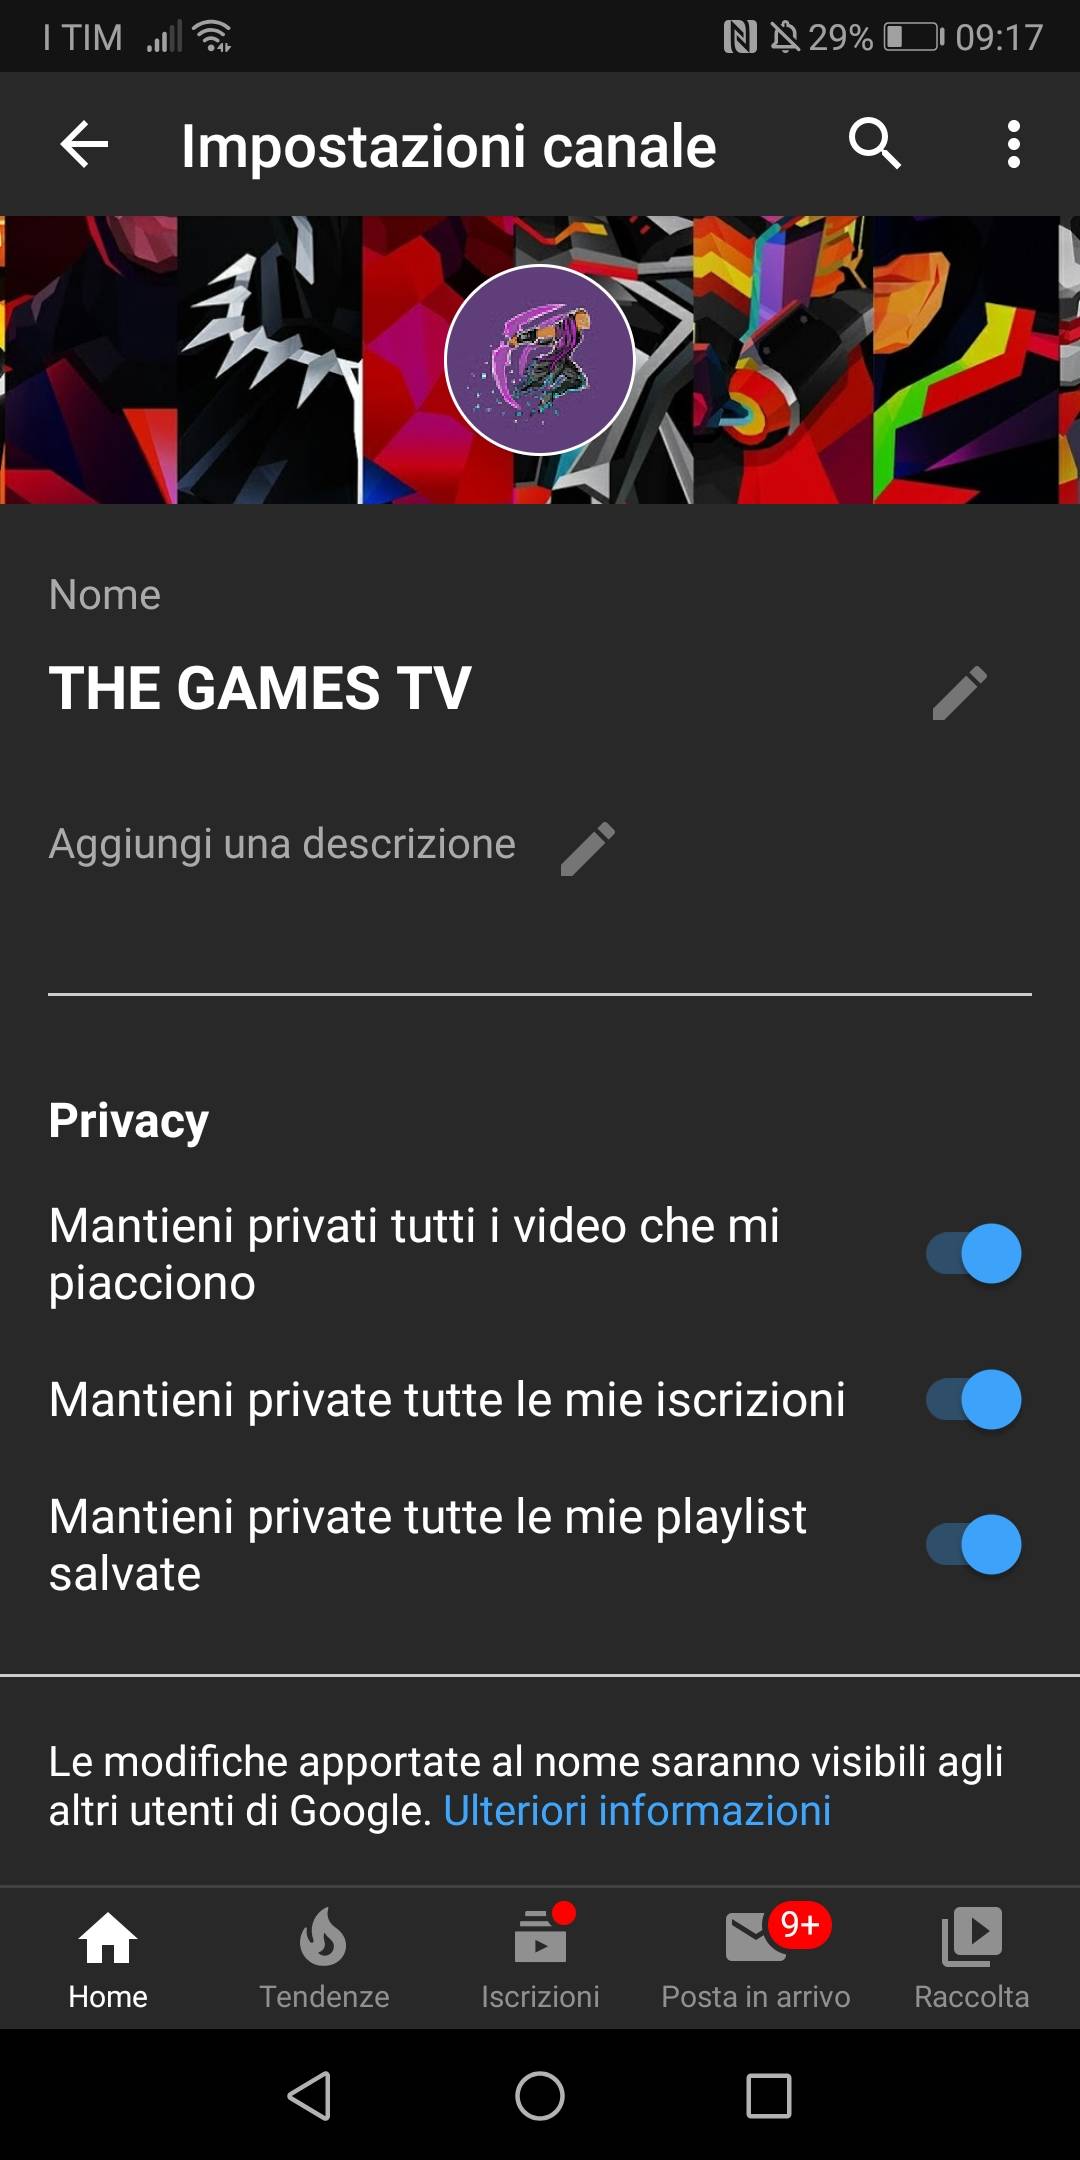 The games tv